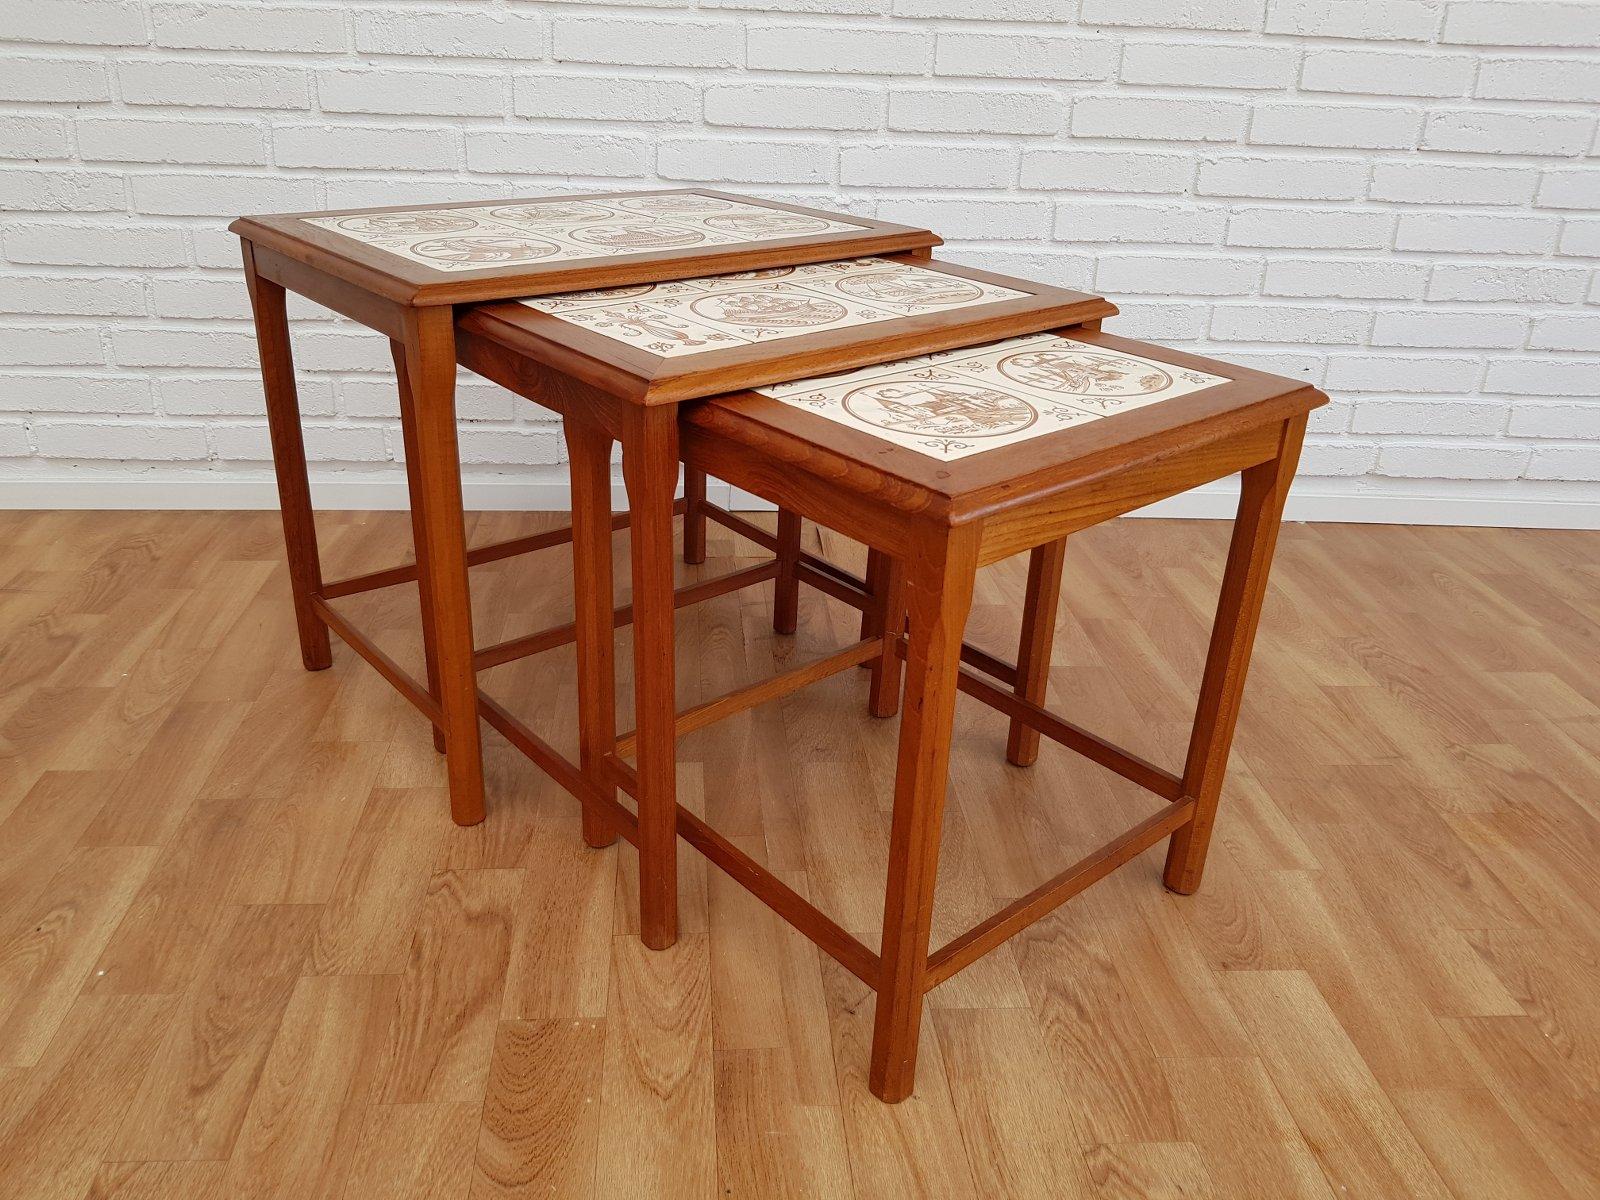 70s, Nesting Table, Danish Design, Hand-Painted Ceramic Tiles, Teak Wood In Good Condition For Sale In Tarm, 82